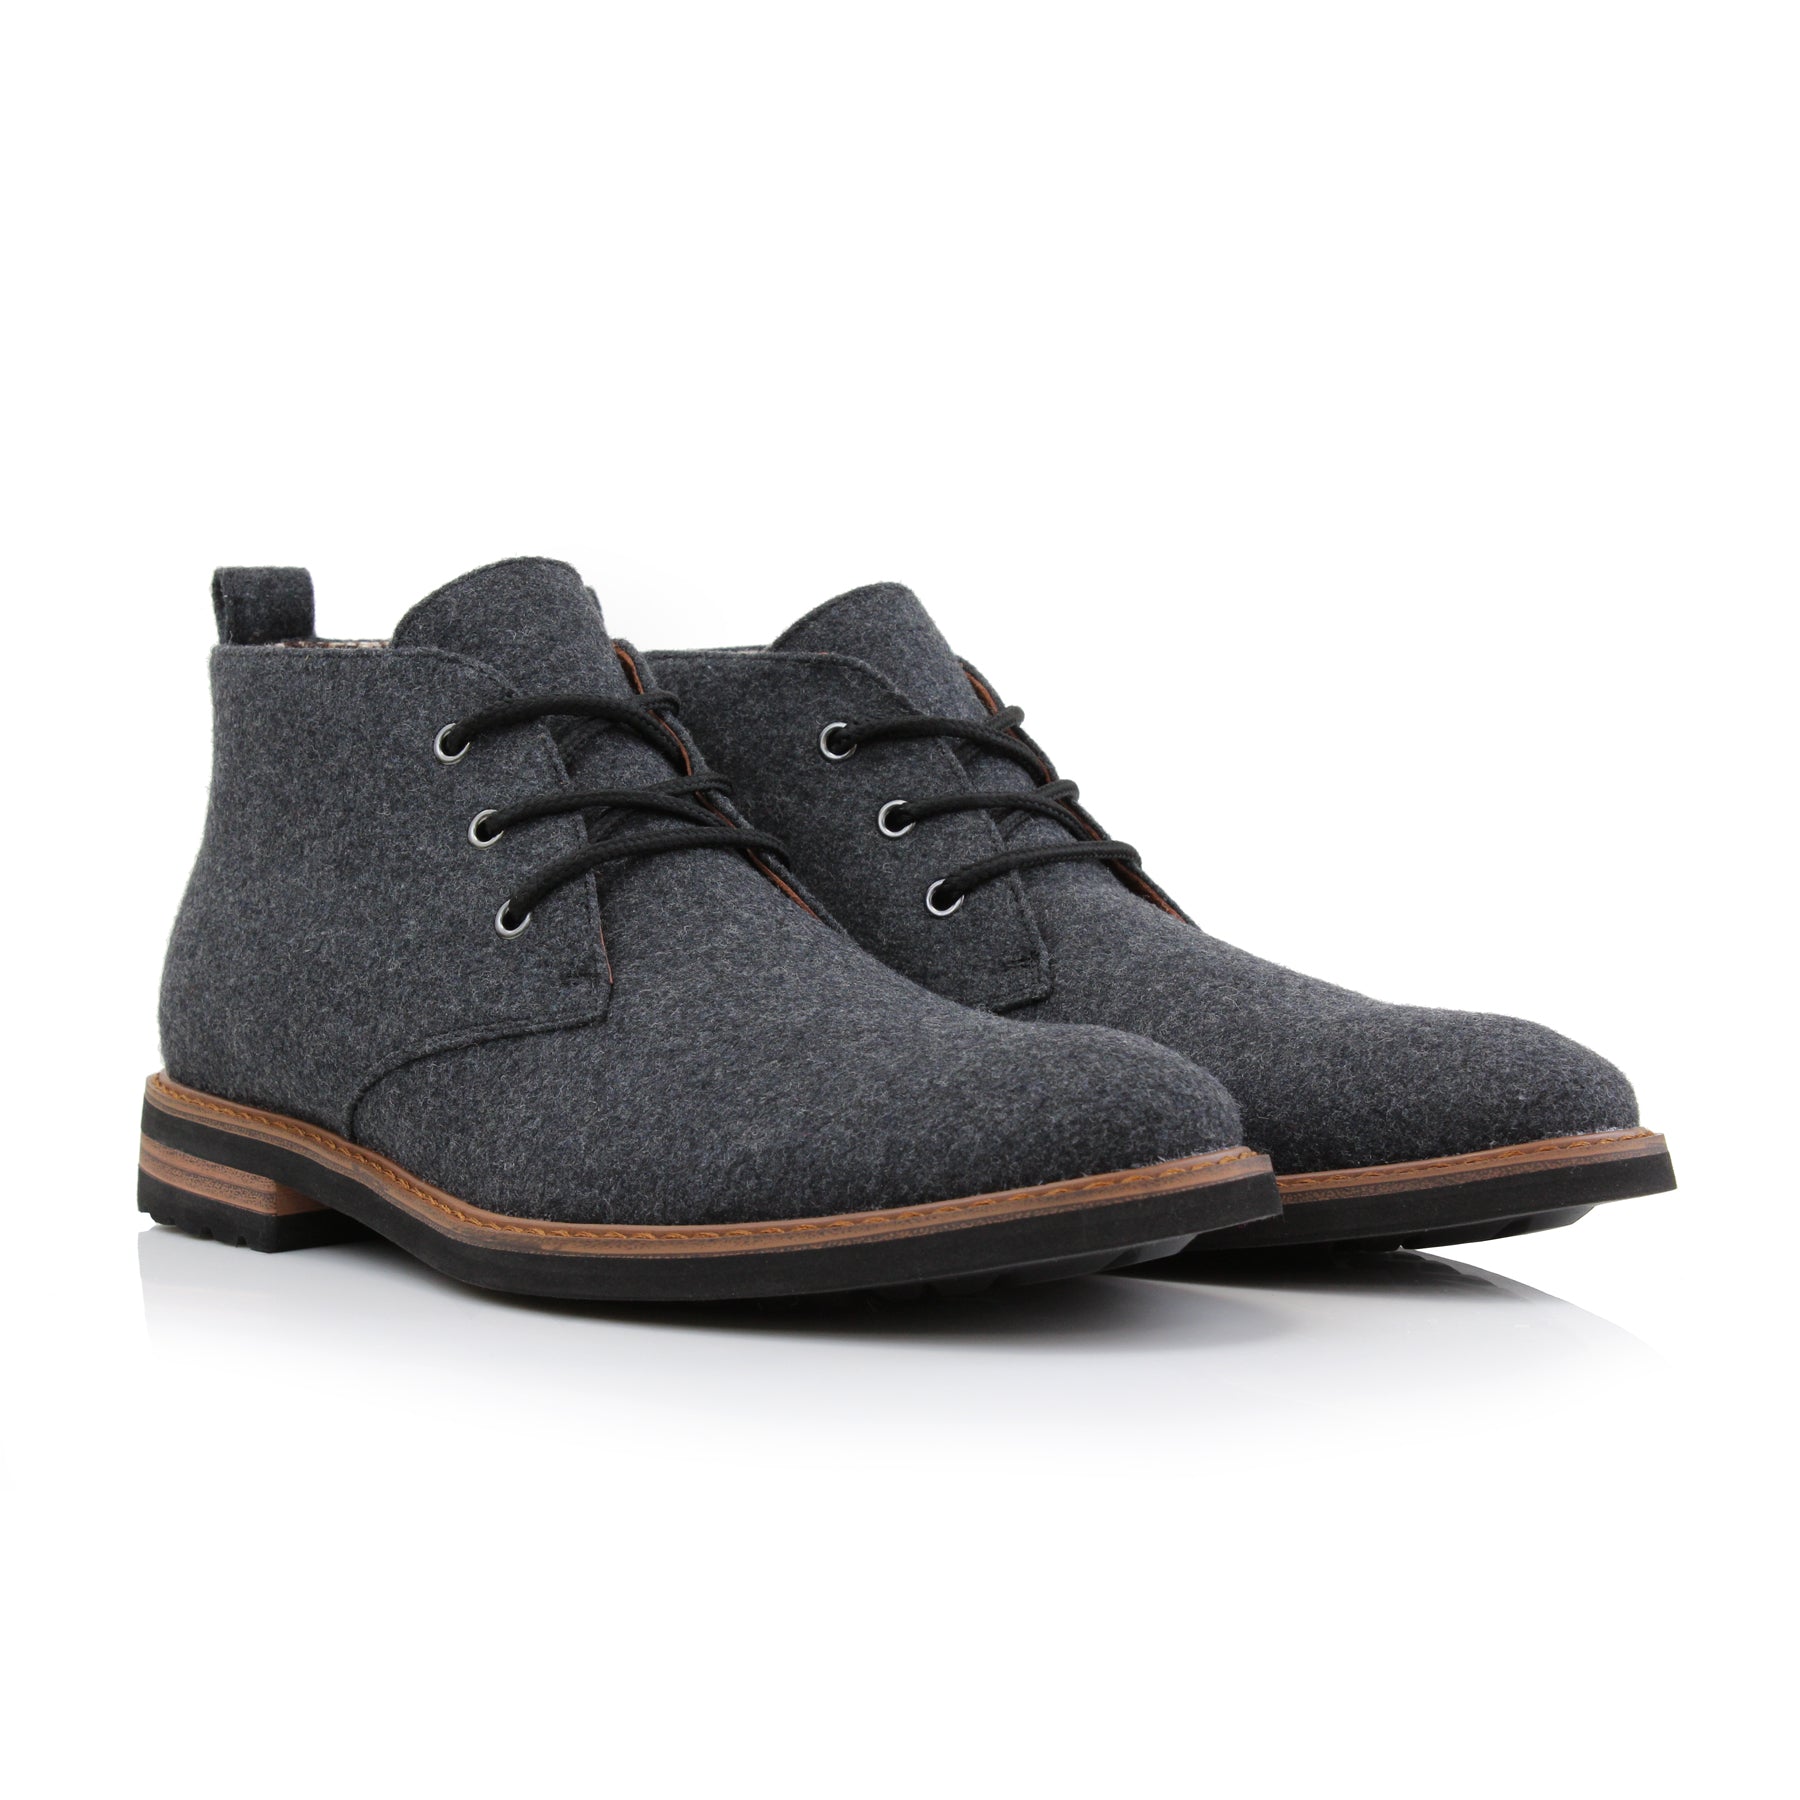 Woolen Chukka Boots | Pablo by Ferro Aldo | Conal Footwear | Paired Angle View